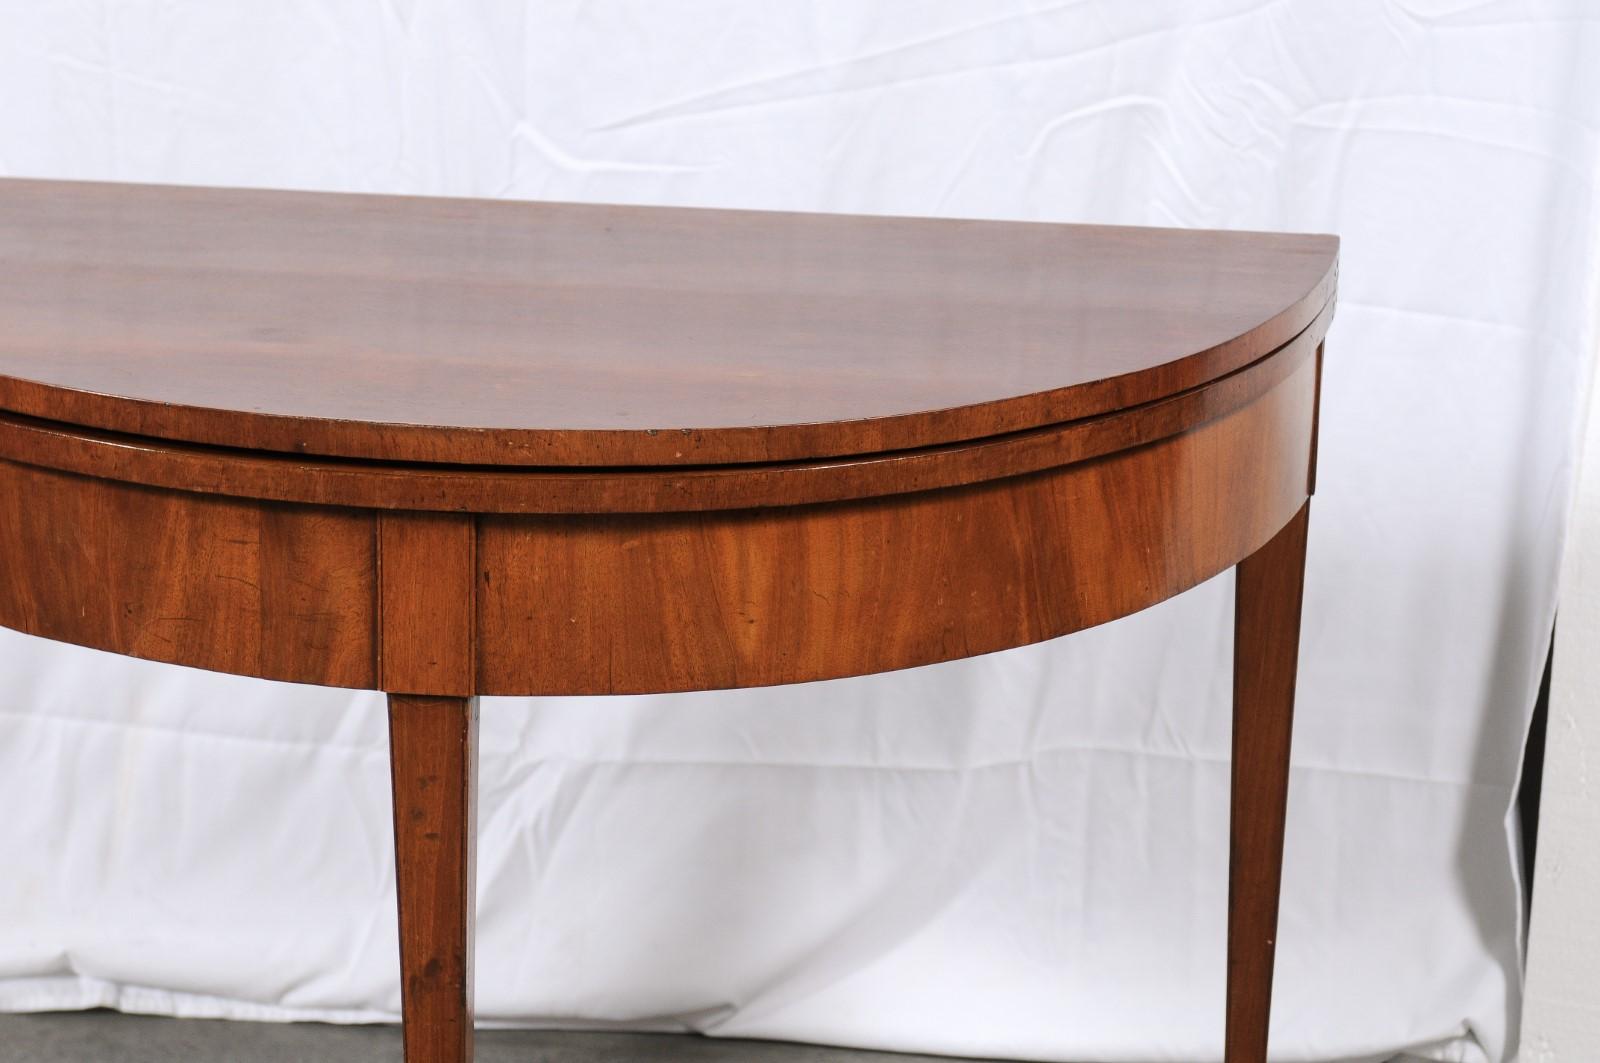 Wood American 19th Century Federal Demi-Lune Card Table